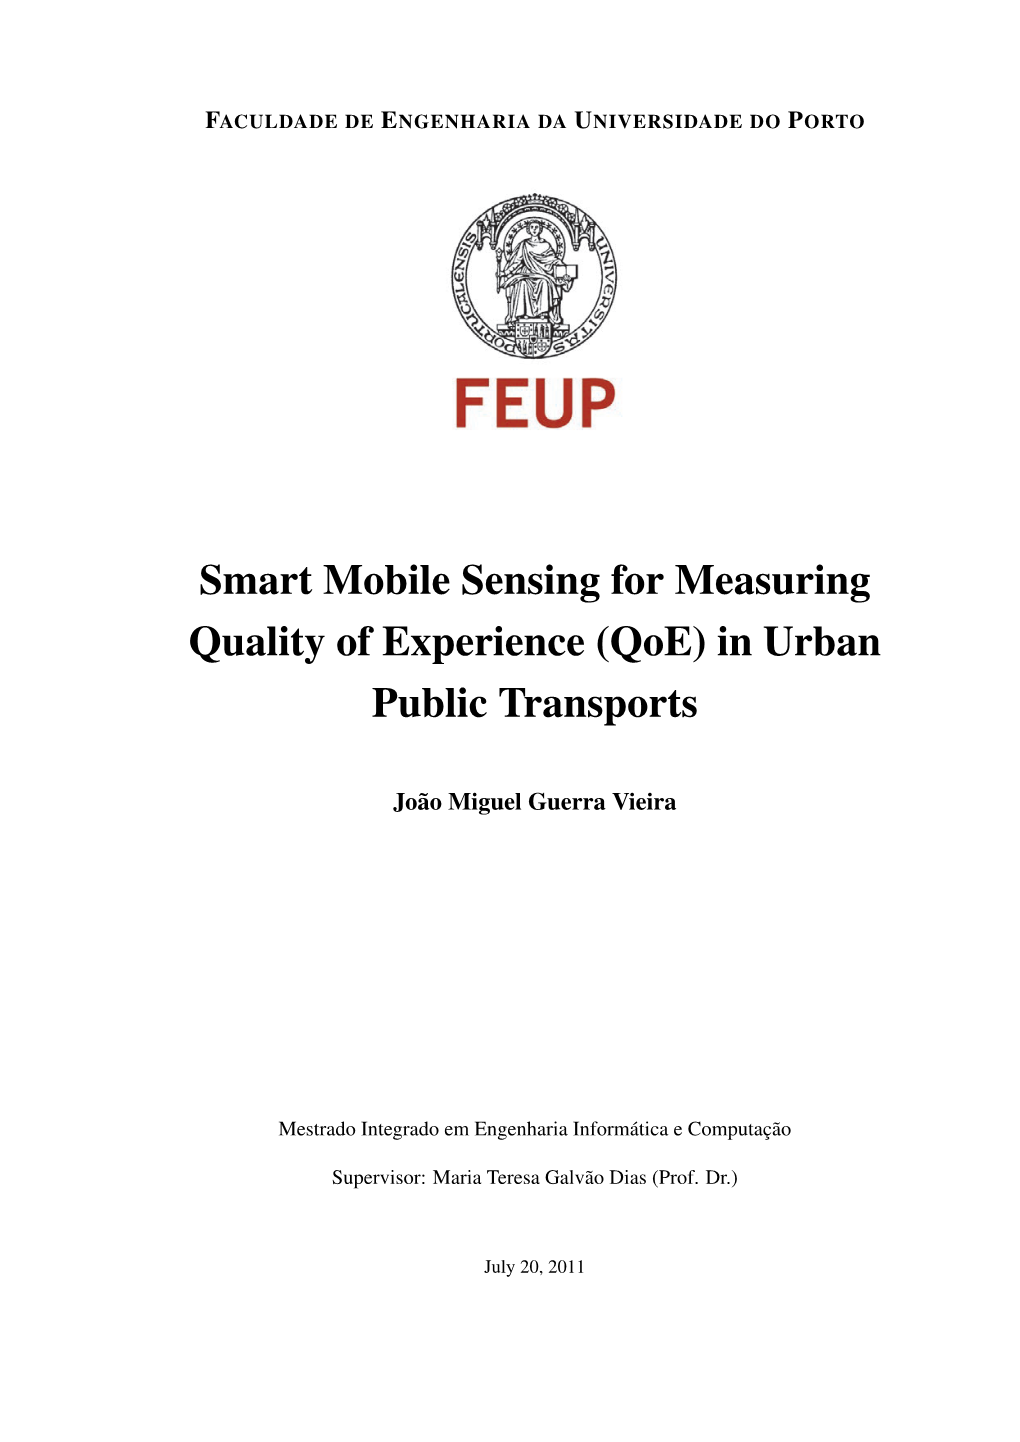 Smart Mobile Sensing for Measuring Quality of Experience (Qoe) in Urban Public Transports